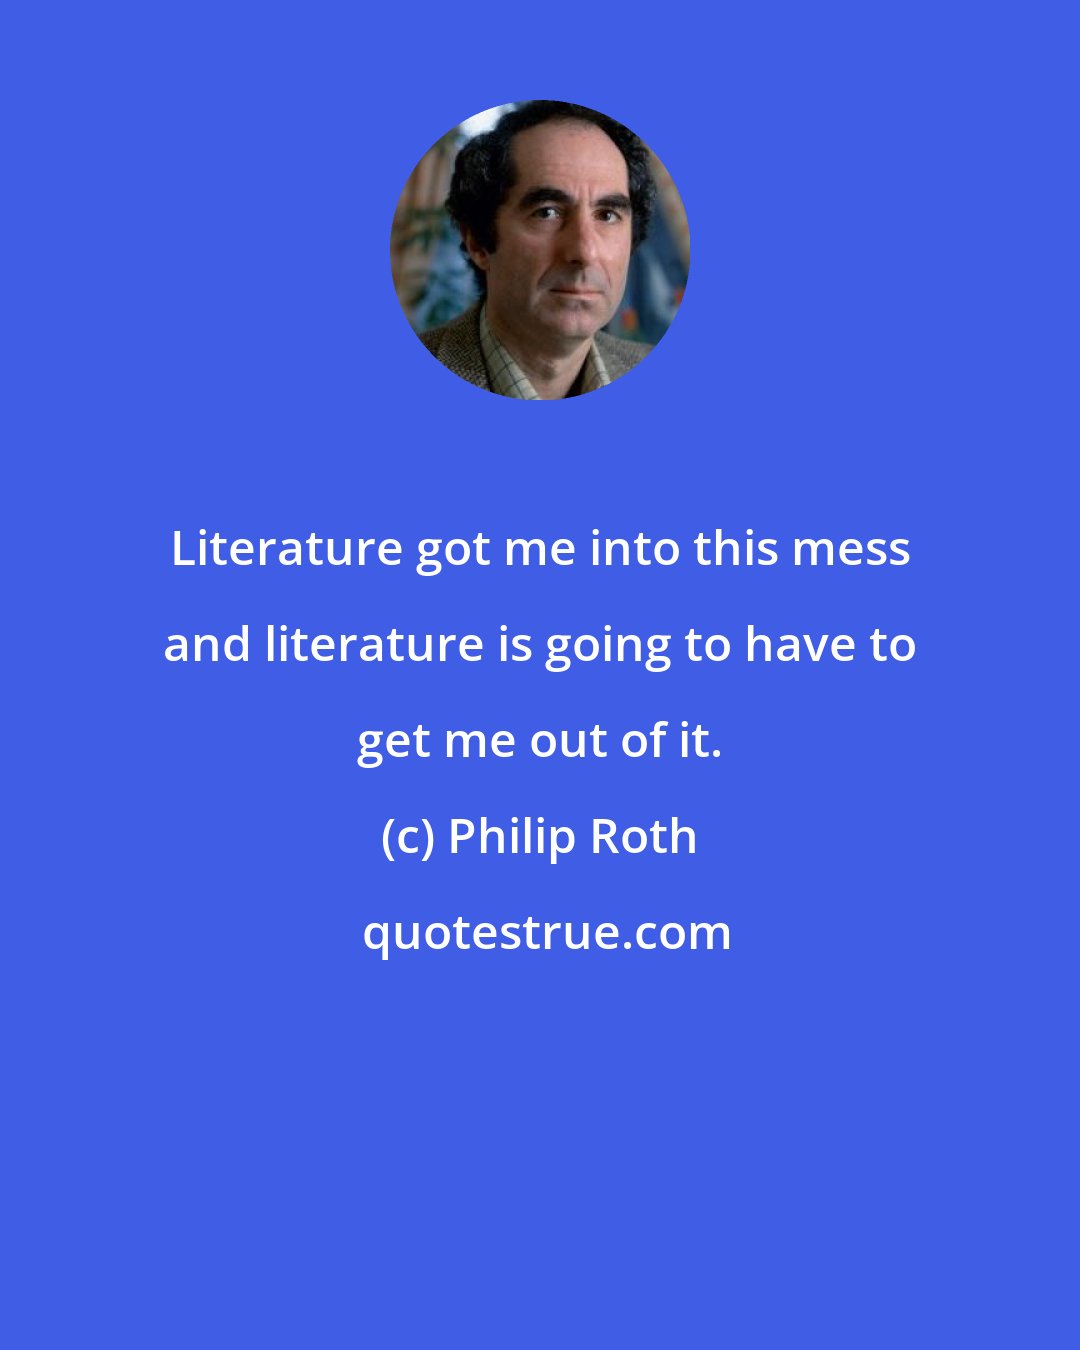 Philip Roth: Literature got me into this mess and literature is going to have to get me out of it.